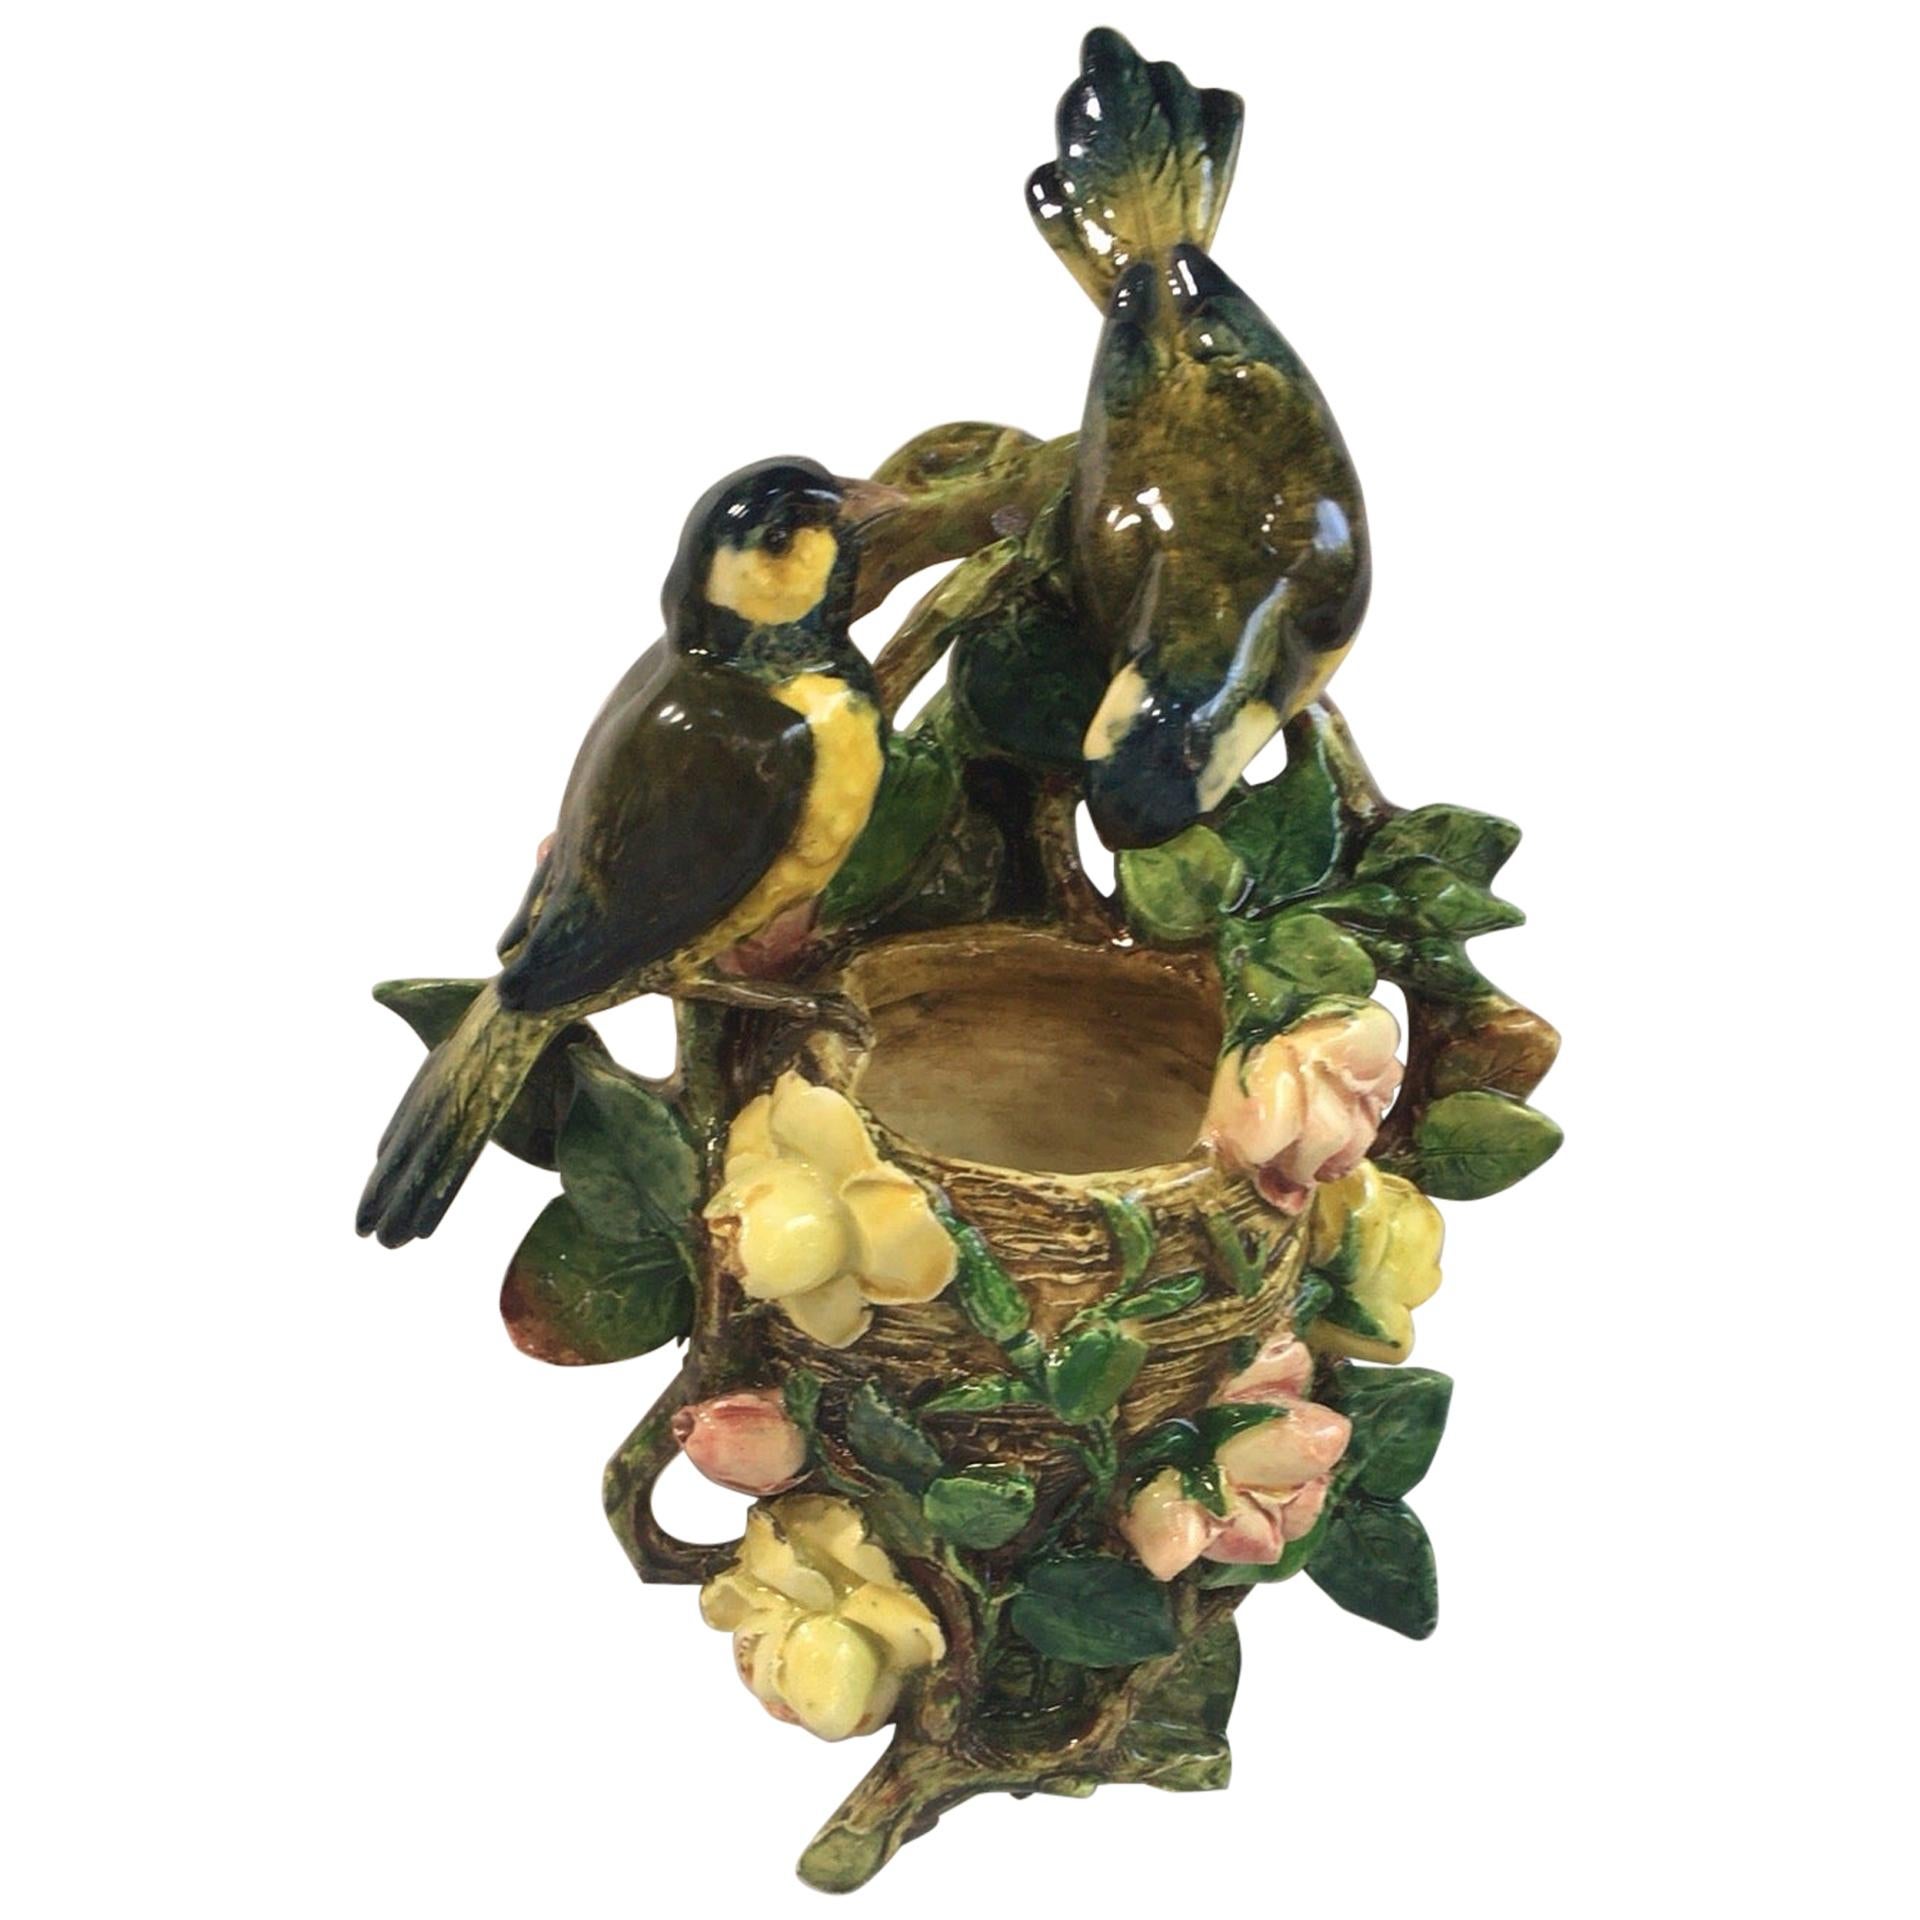 Rare 19th century Majolica birds and roses wall pocket signed Delphin Massier, circa 1890.
The Massier are known for the quality of their unique enamels and paintings. The Massier family produced different pieces with birds in a very creative style